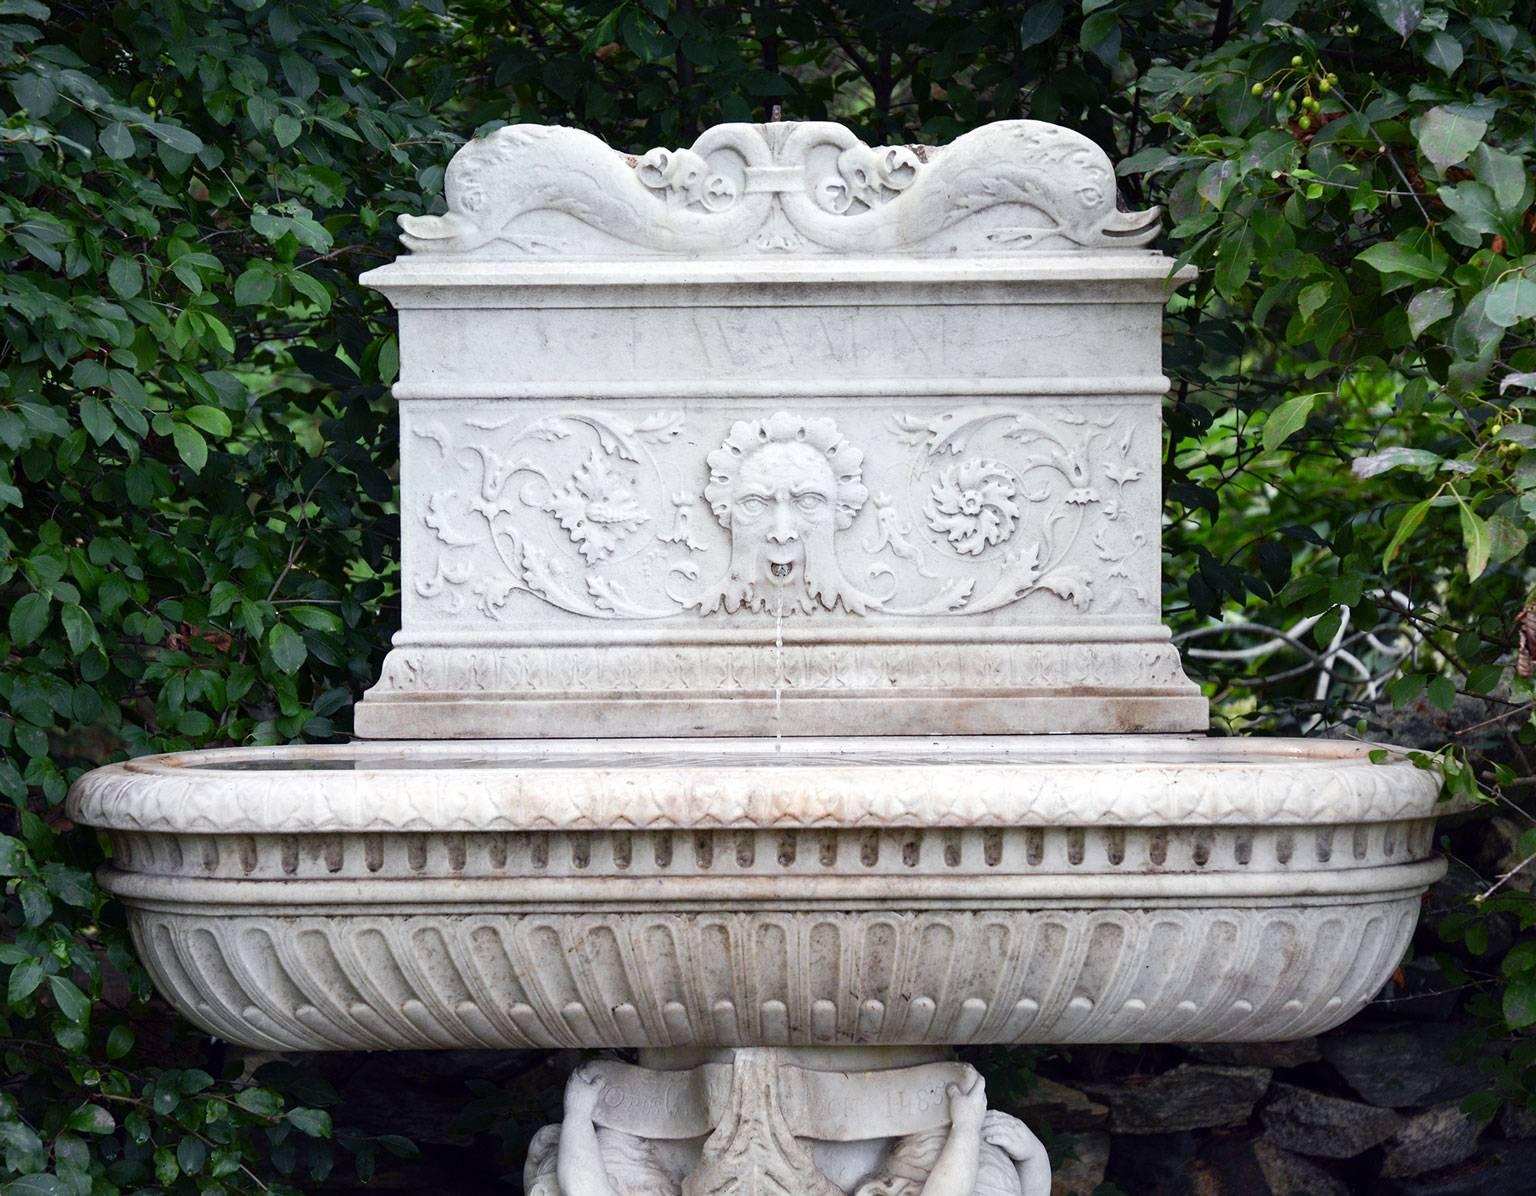 An exceptional carved marble lavabo, or wall fountain, comprised of three pieces, the backplate with lapidary script reading “LAVAMINI,” meaning “to wash,” ornamented with stylized dolphins, floral rinceaux, and a central “Green Man” mask piped for